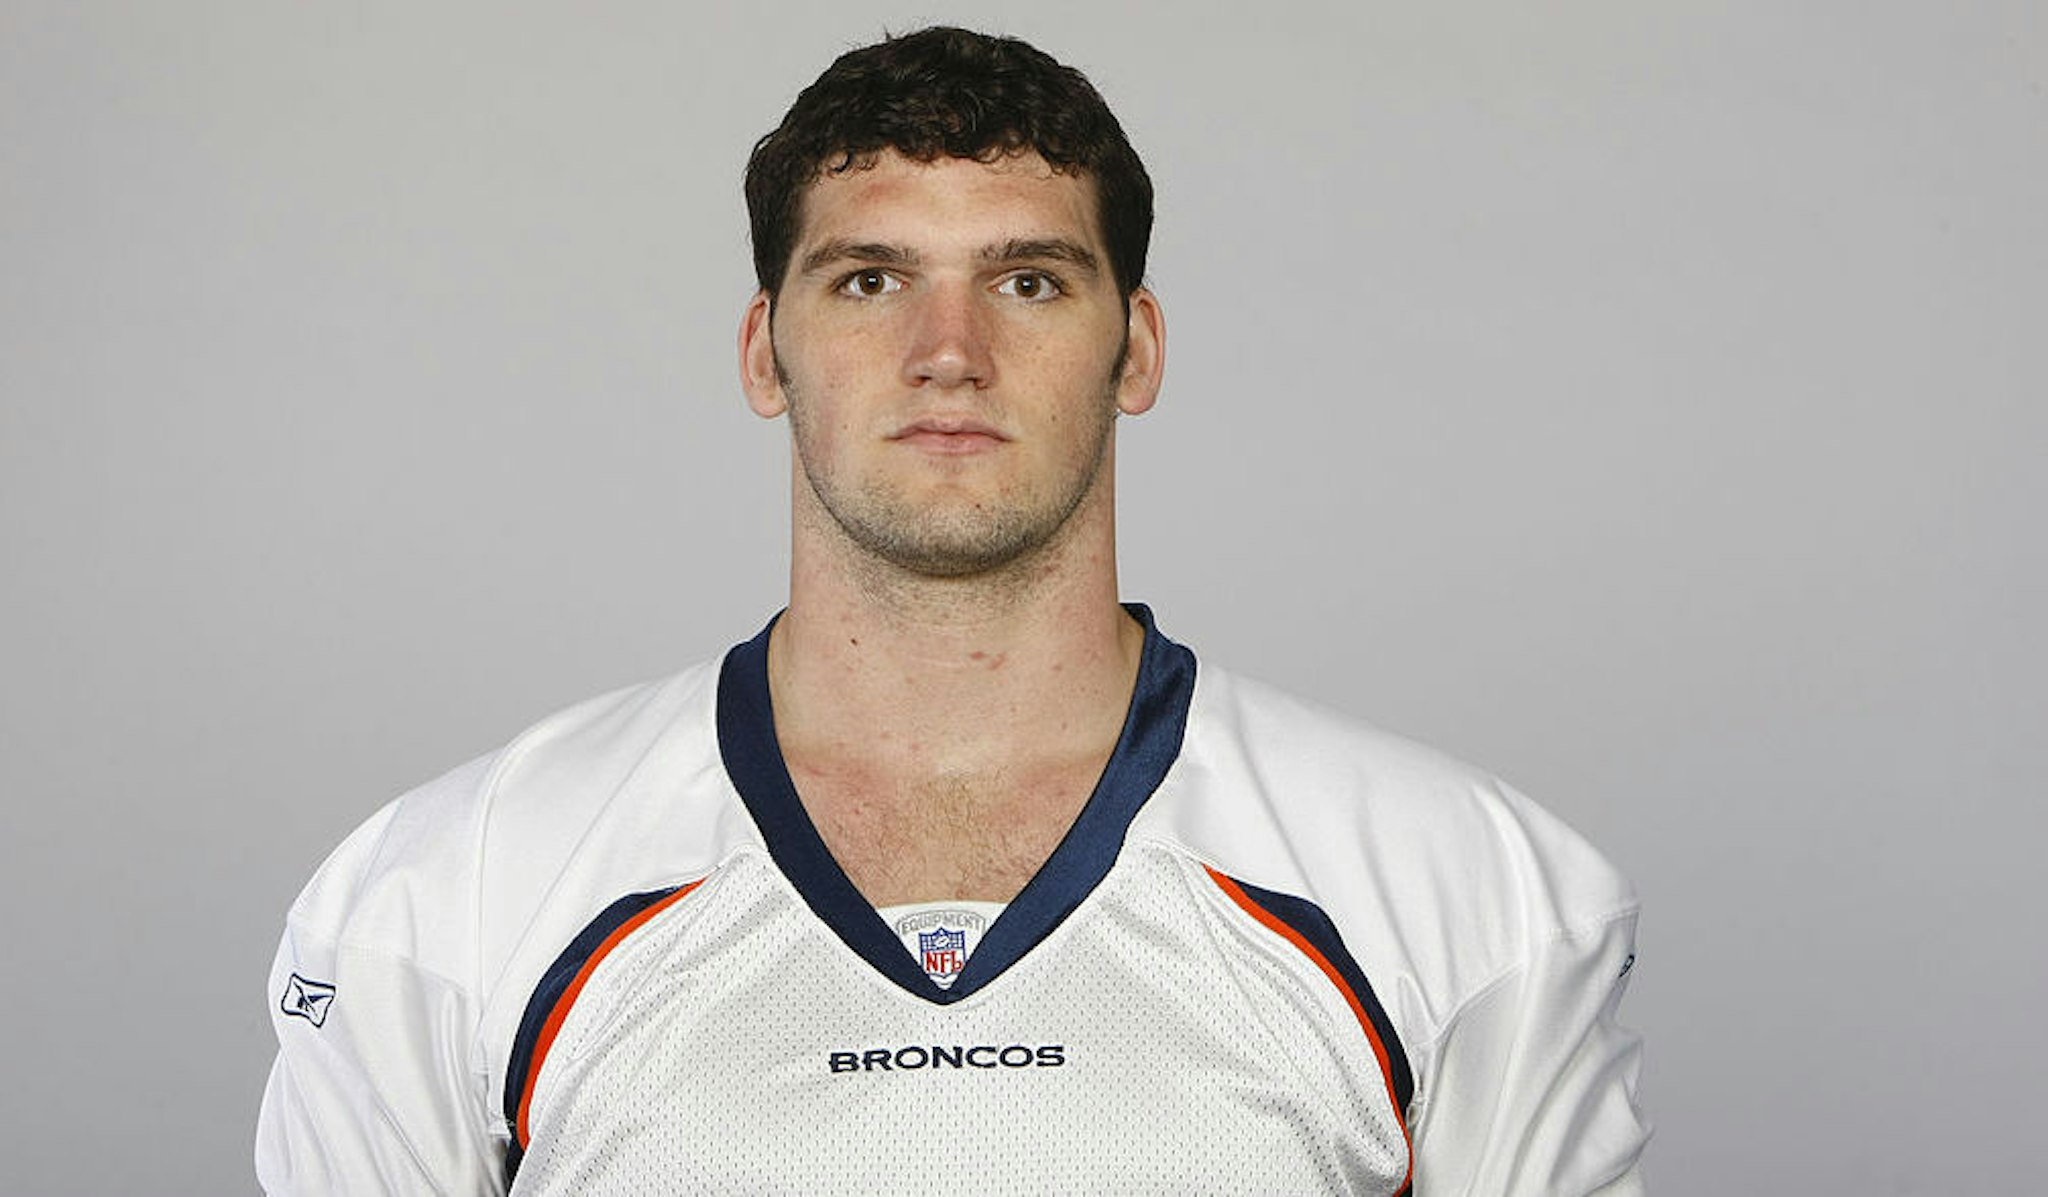 In this photo provided by the NFL, Paul Duncan of the Denver Broncos poses for his 2010 NFL headshot circa 2010 in Englewood, Colorado.